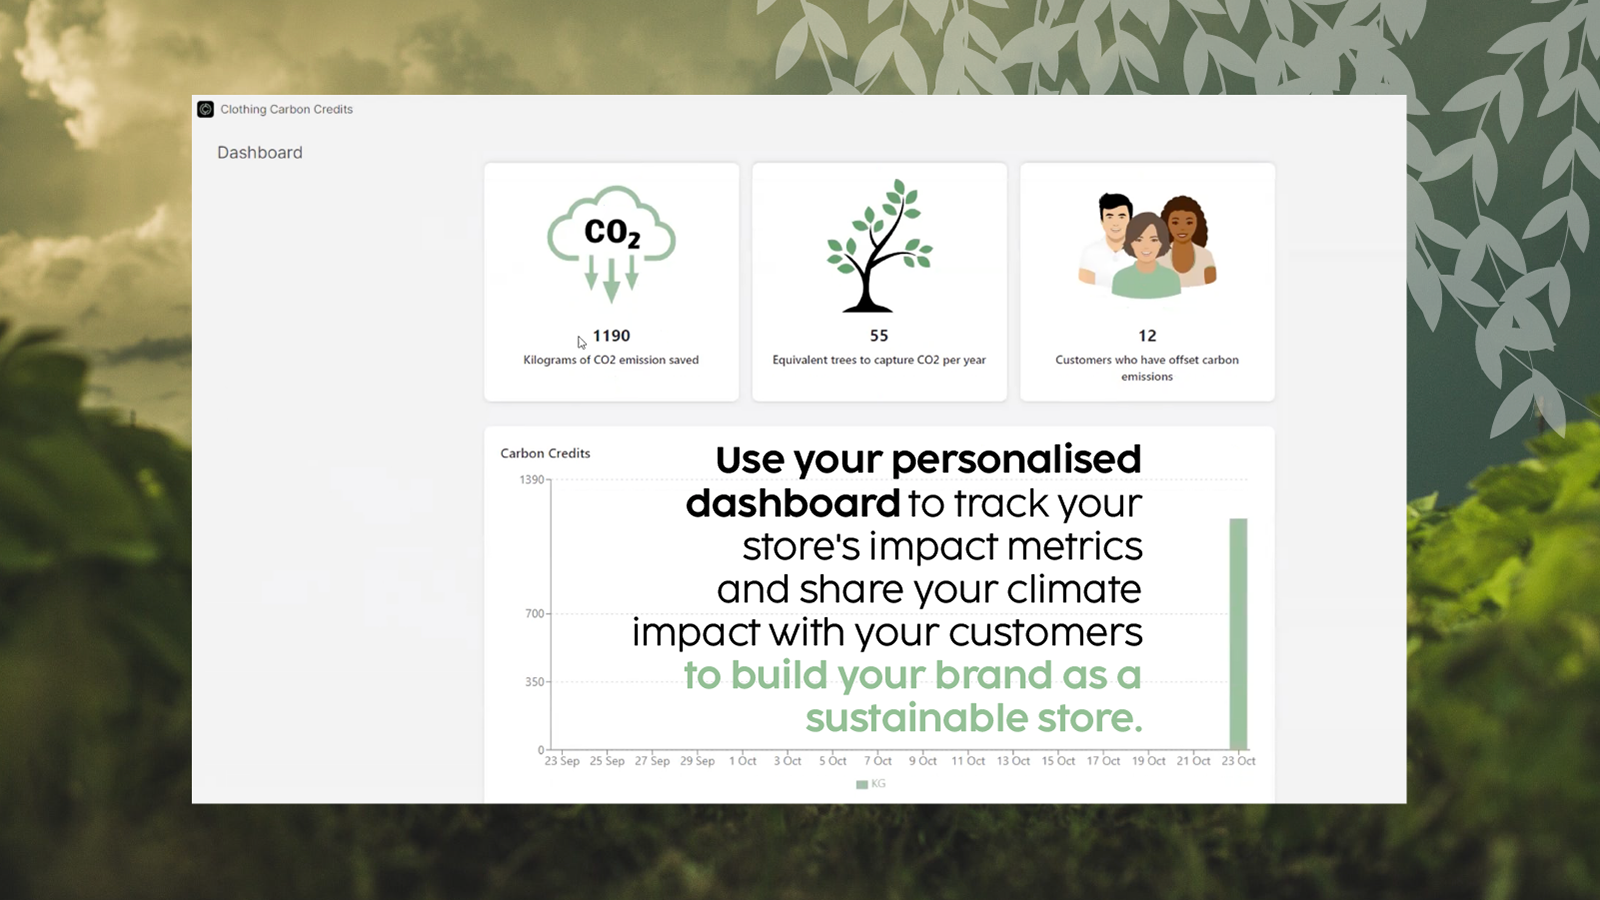 Your personalised dashboard will track your impact metrics